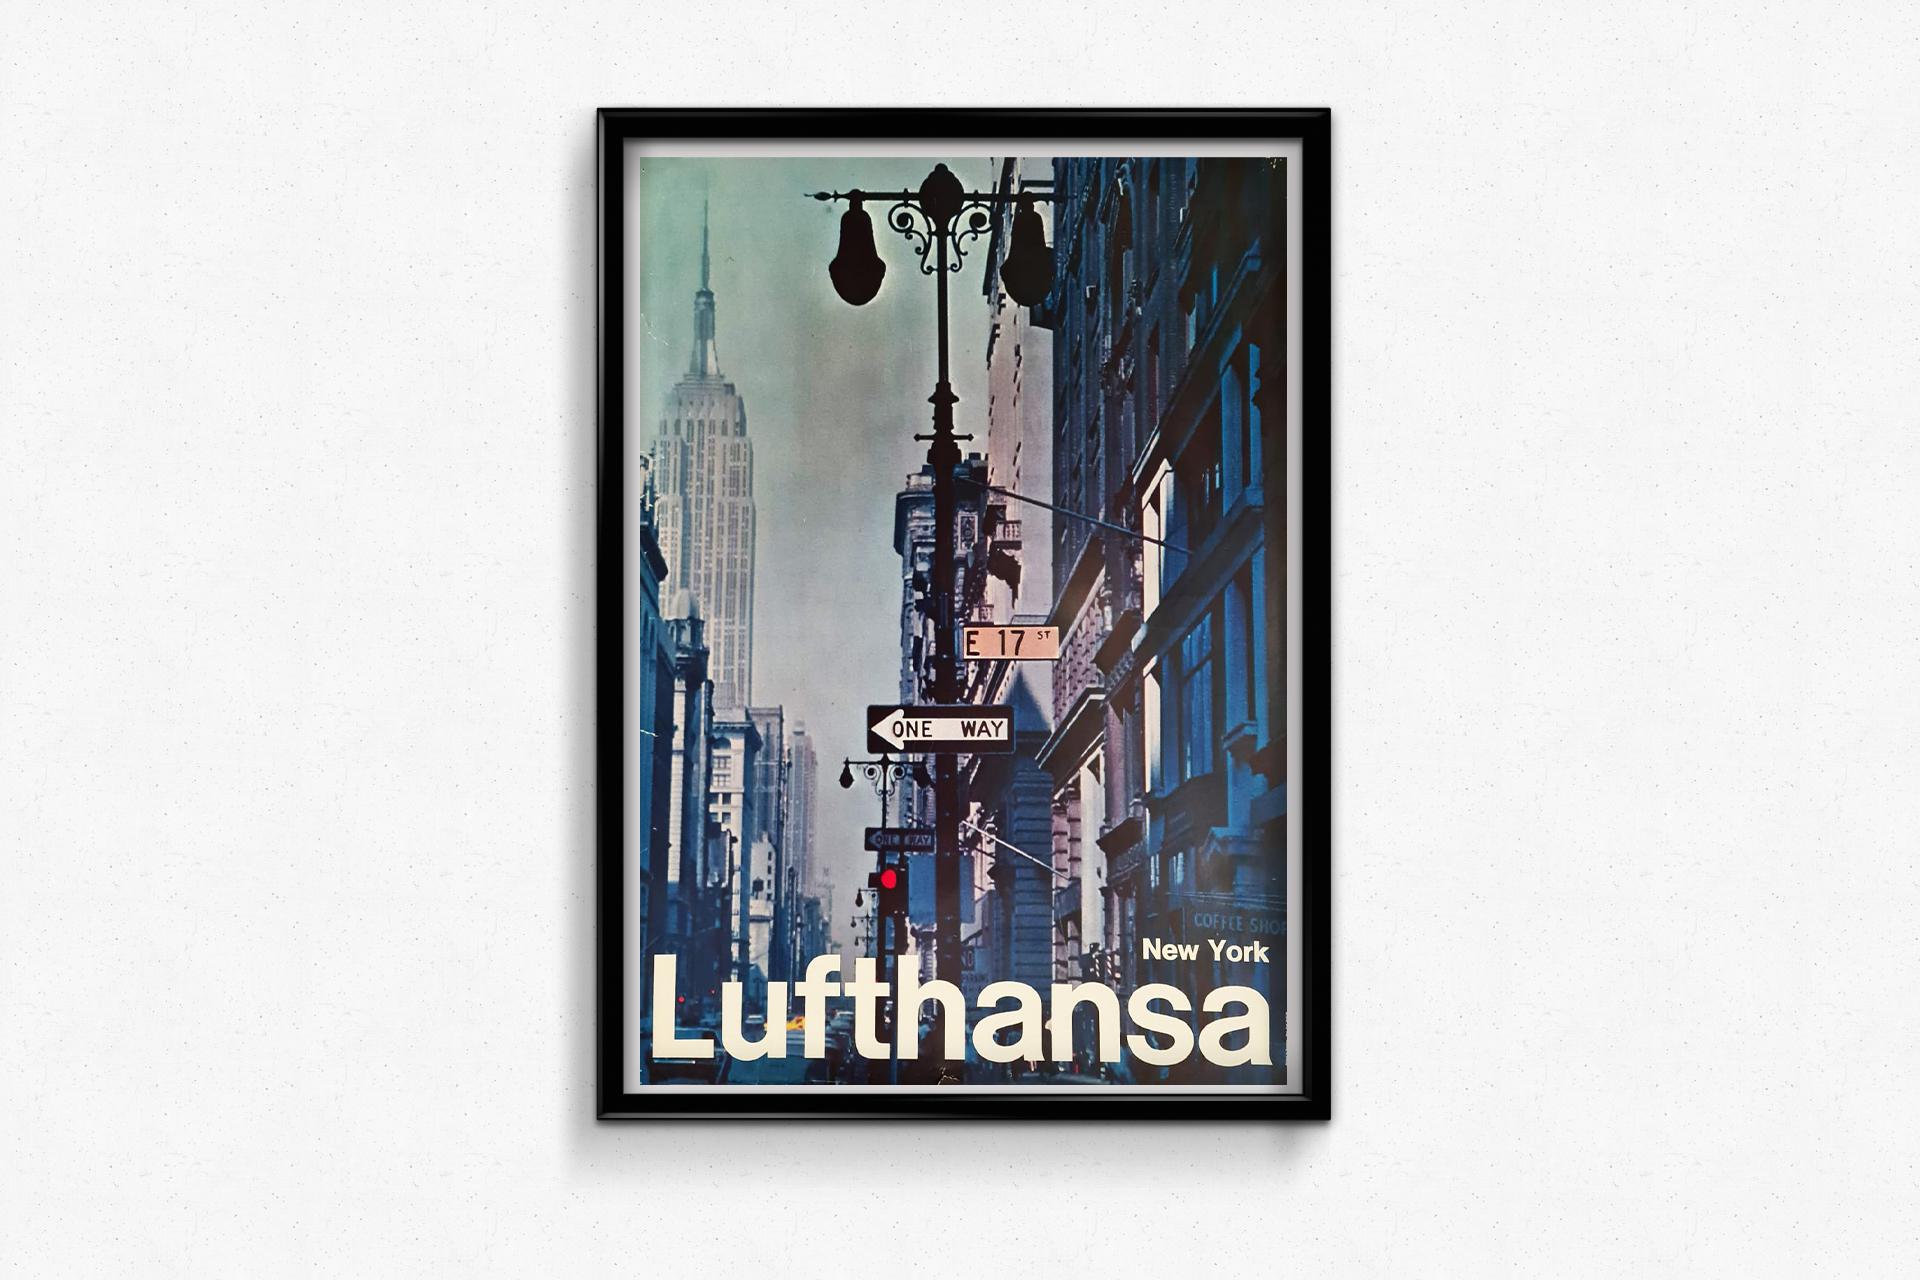 This beautiful poster was made in 1972, for Lufthansa, a private airline of German origin.

It is one of the oldest airline companies. It has one of the largest fleets of aircraft and is also the leading European airline in terms of passengers